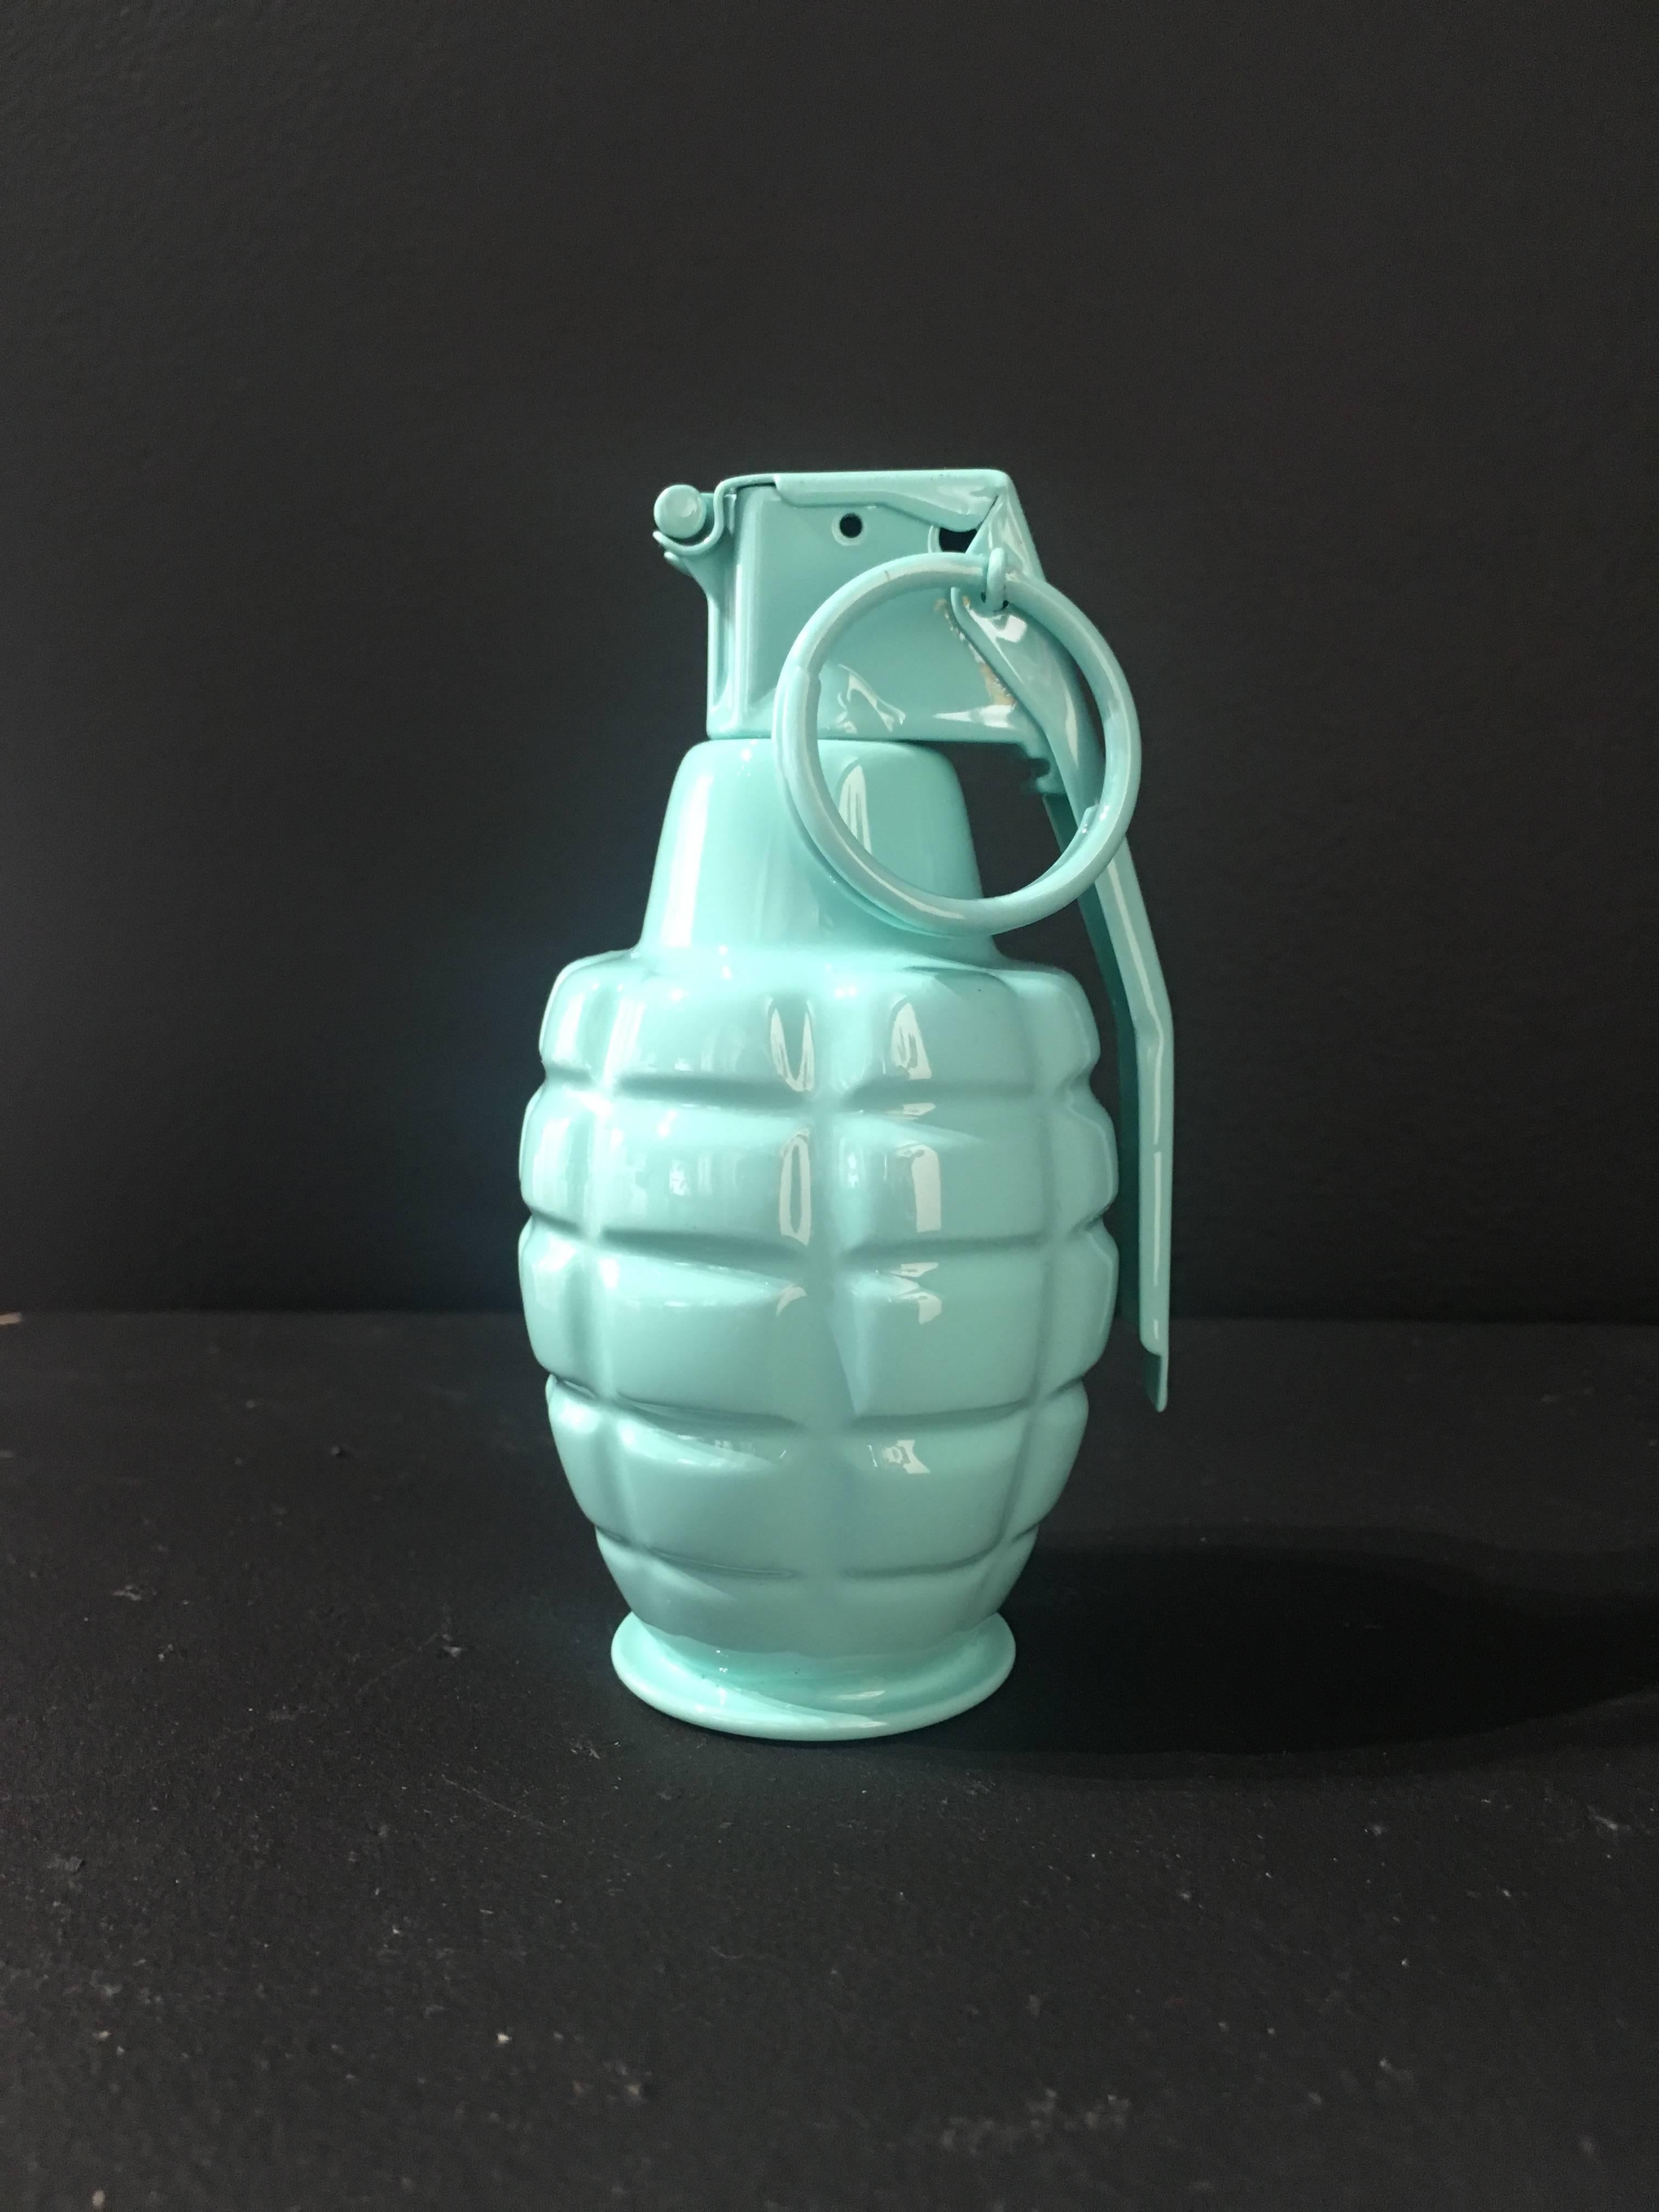 Mr. Debonair
Tiffany #9 
4" x 2"
Grenade Sculpture
Automotive Paint, Resin, Metal Top
Commissions Available

Emil Armendariz, alias Mr. Debonair became renown in the world of contemporary art by mixing luxury brands with firearms and grenades in